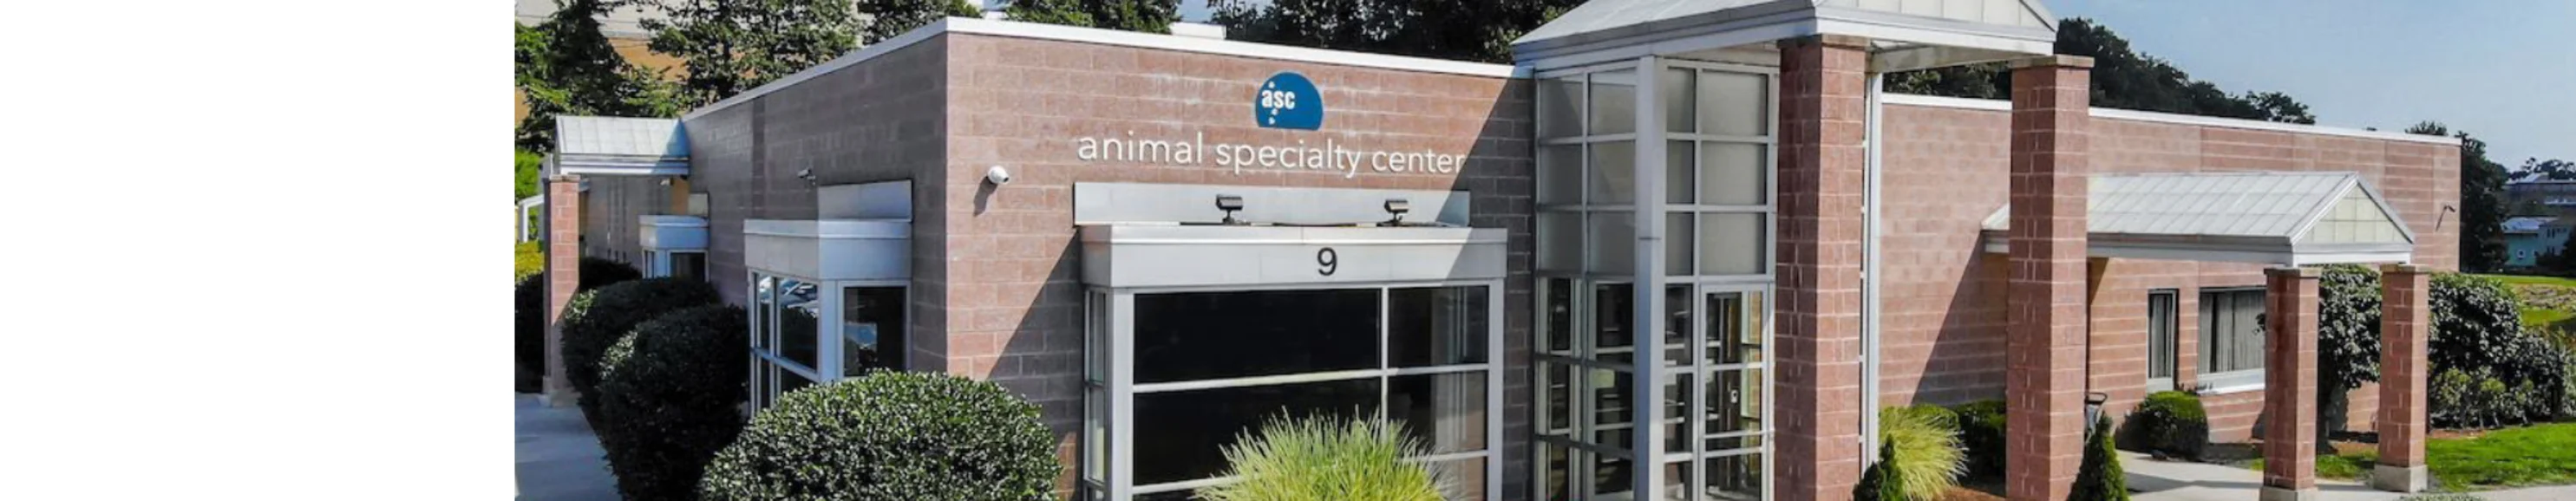 Exterior of Animal Specialty Center